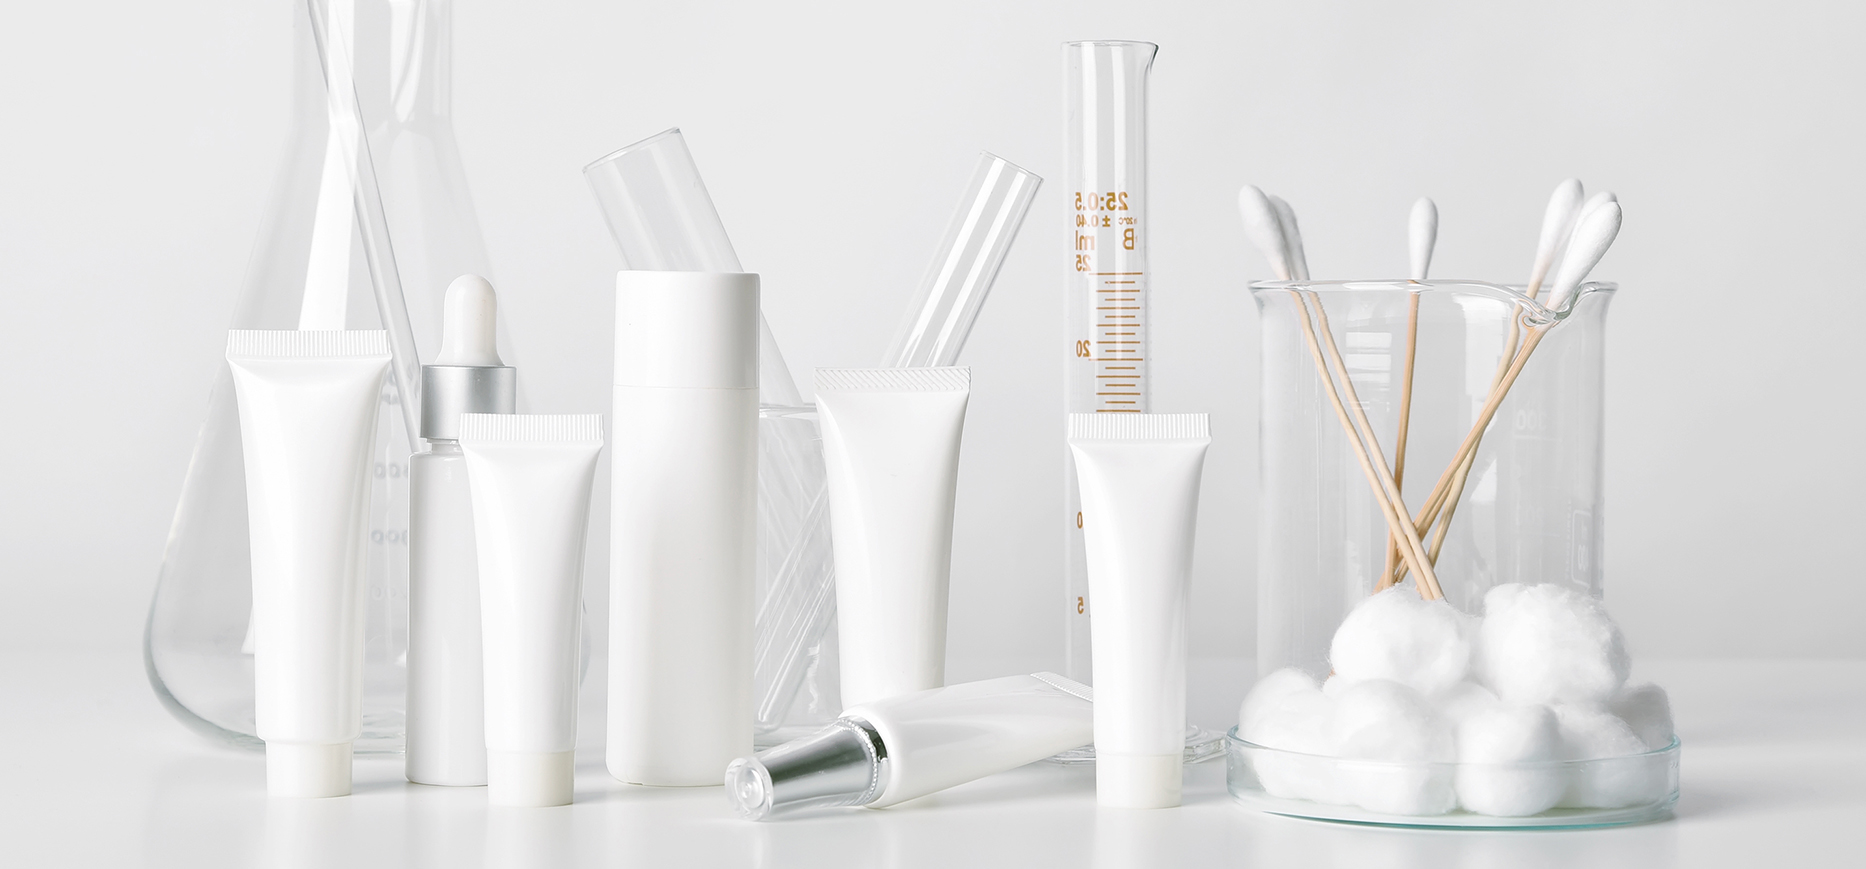 Various blank white and glass tubes, cosmetic bottles and scientific equipment. All items are clean and sanitized.